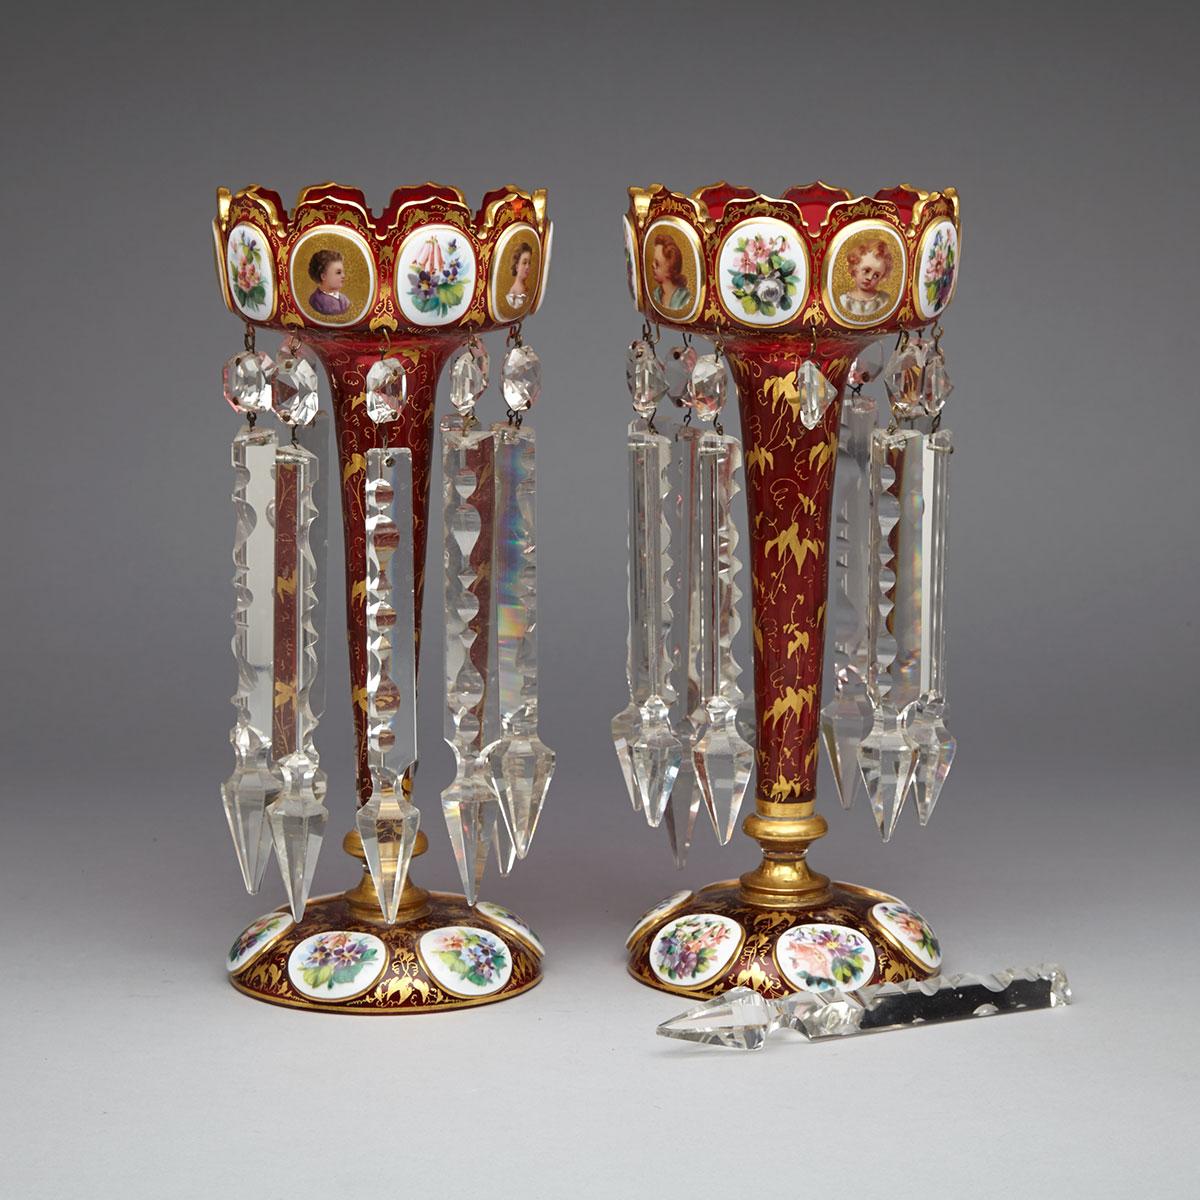 Pair of Bohemian Overlaid and Enameled Red Glass Lustres, late 19th/early 20th century